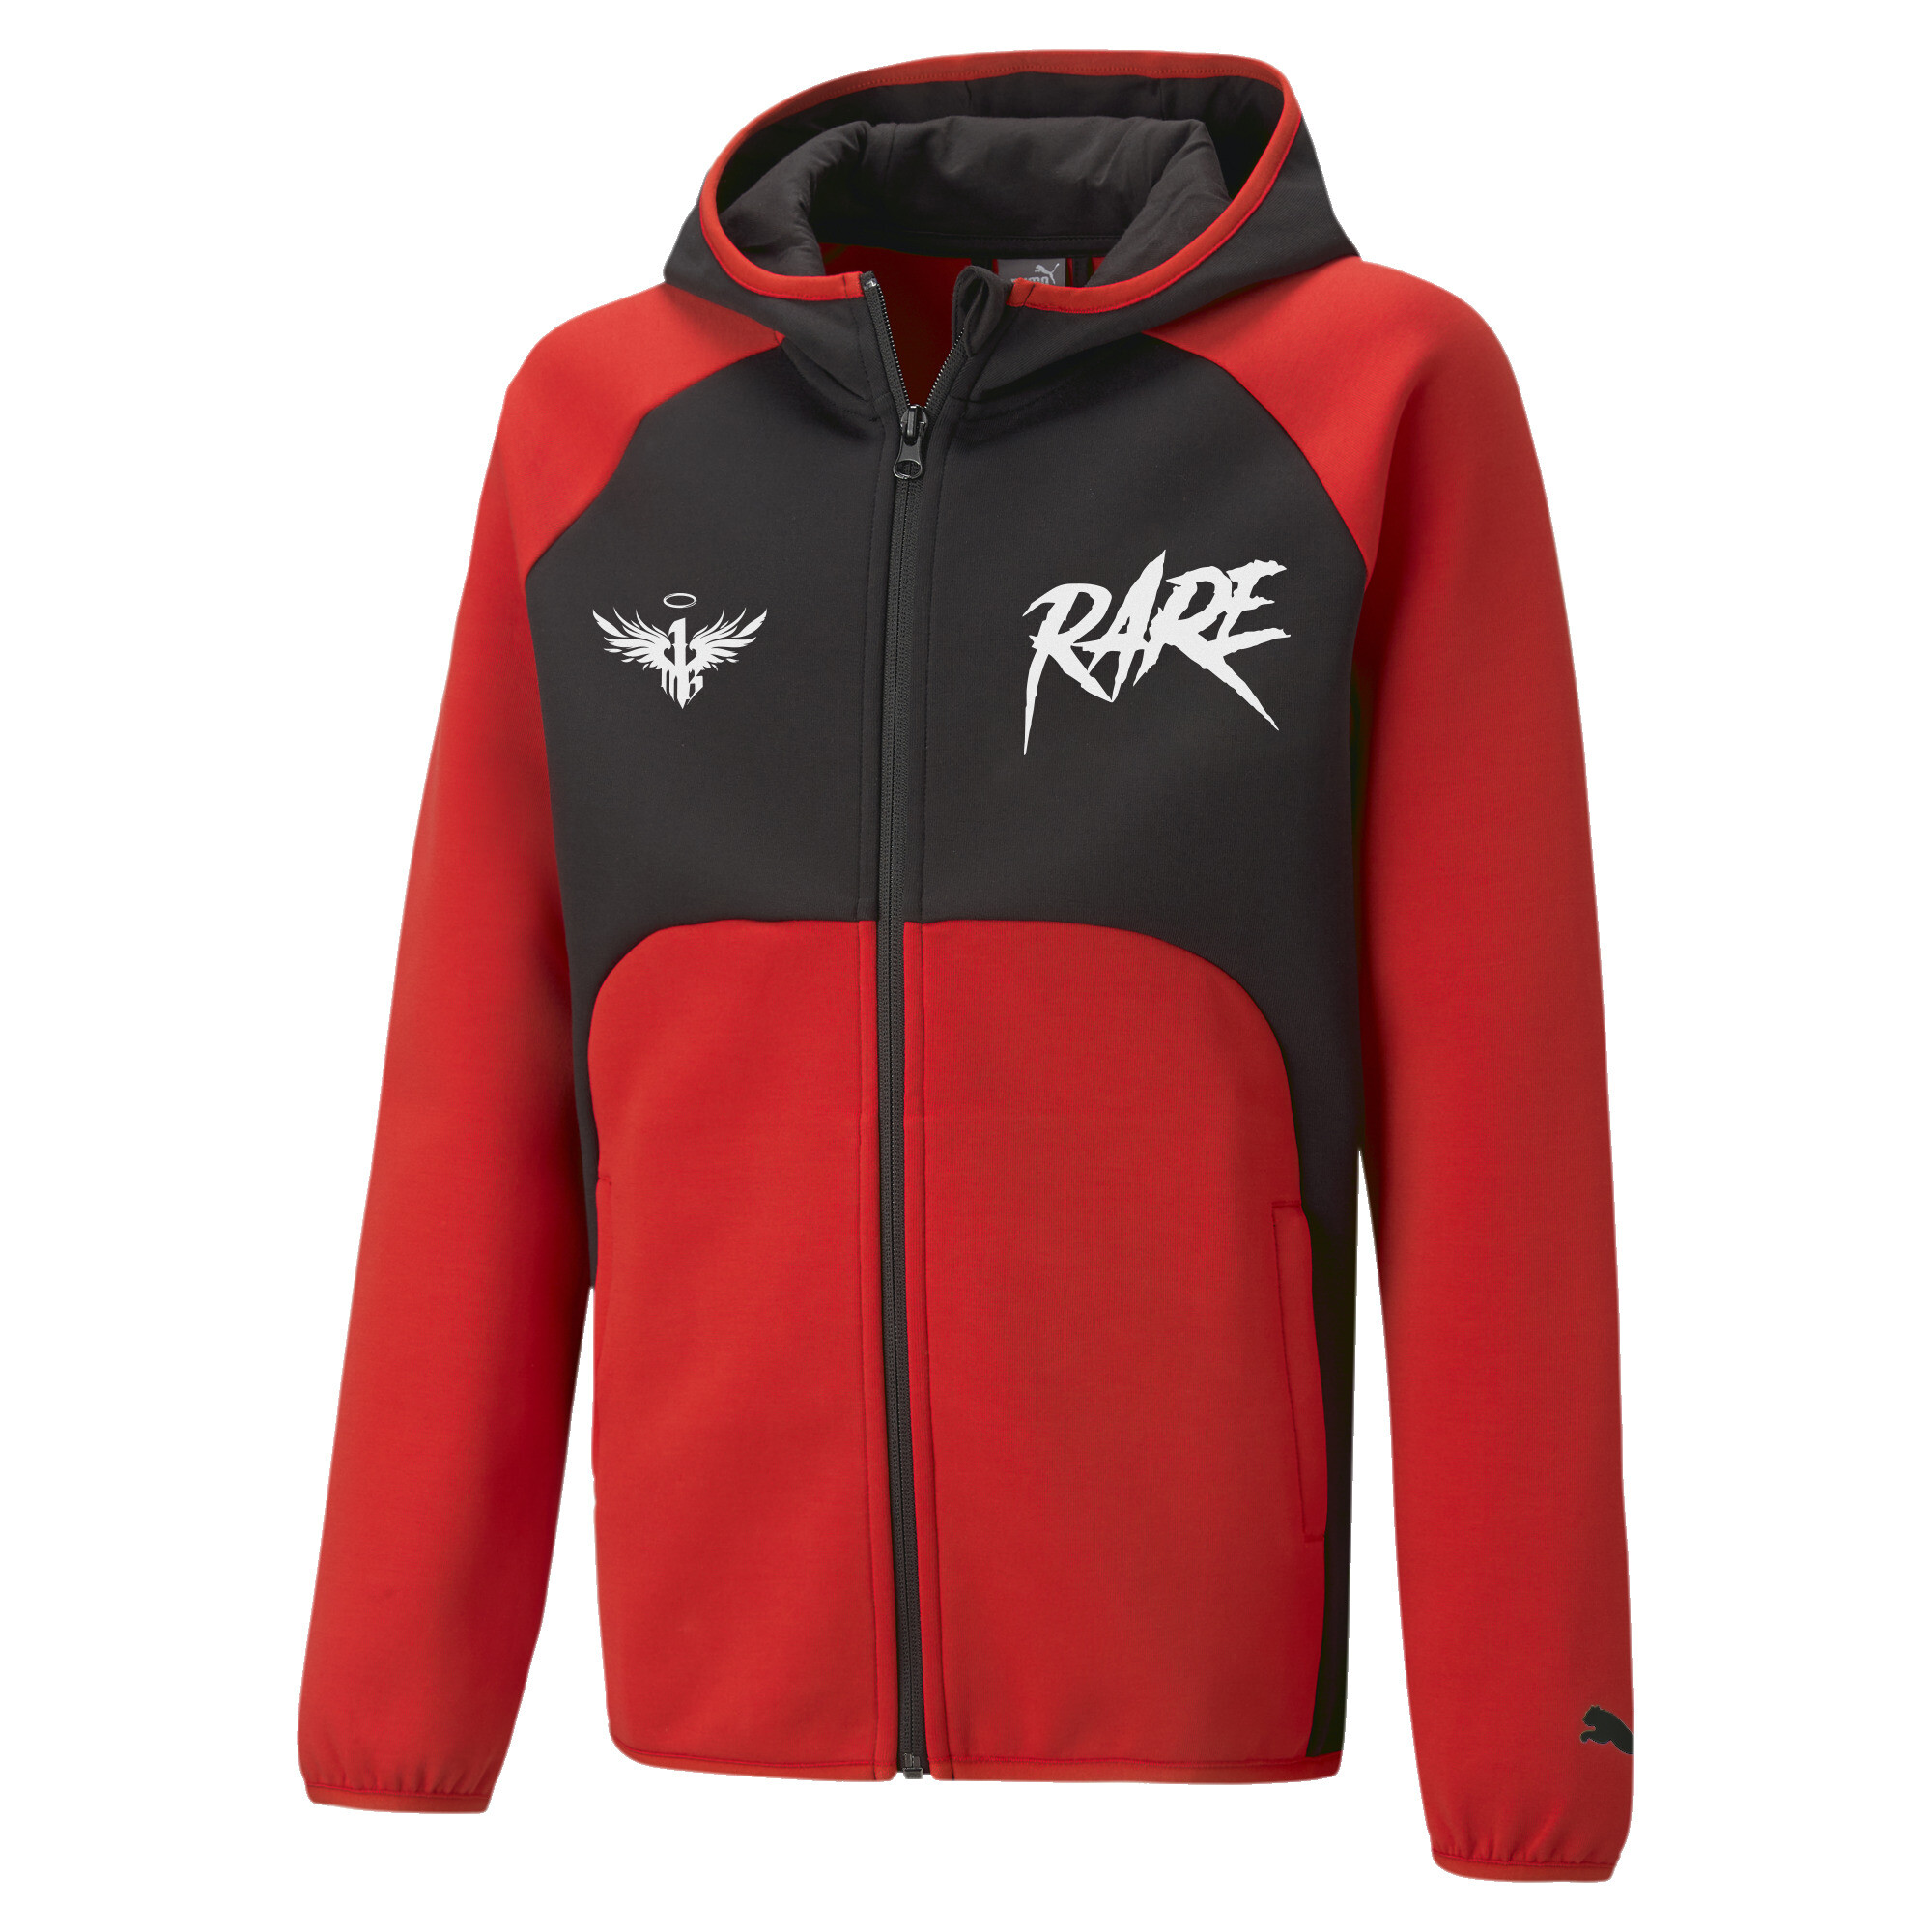 PUMA X MELO Dime Jacket In Red, Size 15-16 Youth